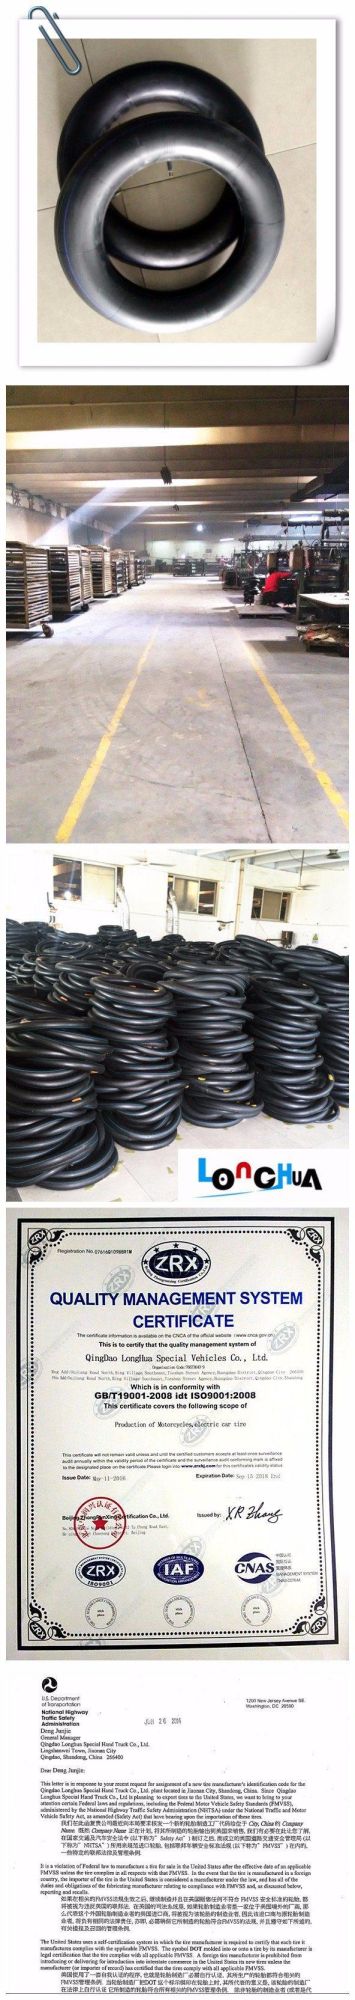 Natural Rubber and Butyl Rubber Motorcycle Tyre and Tube (300-17)